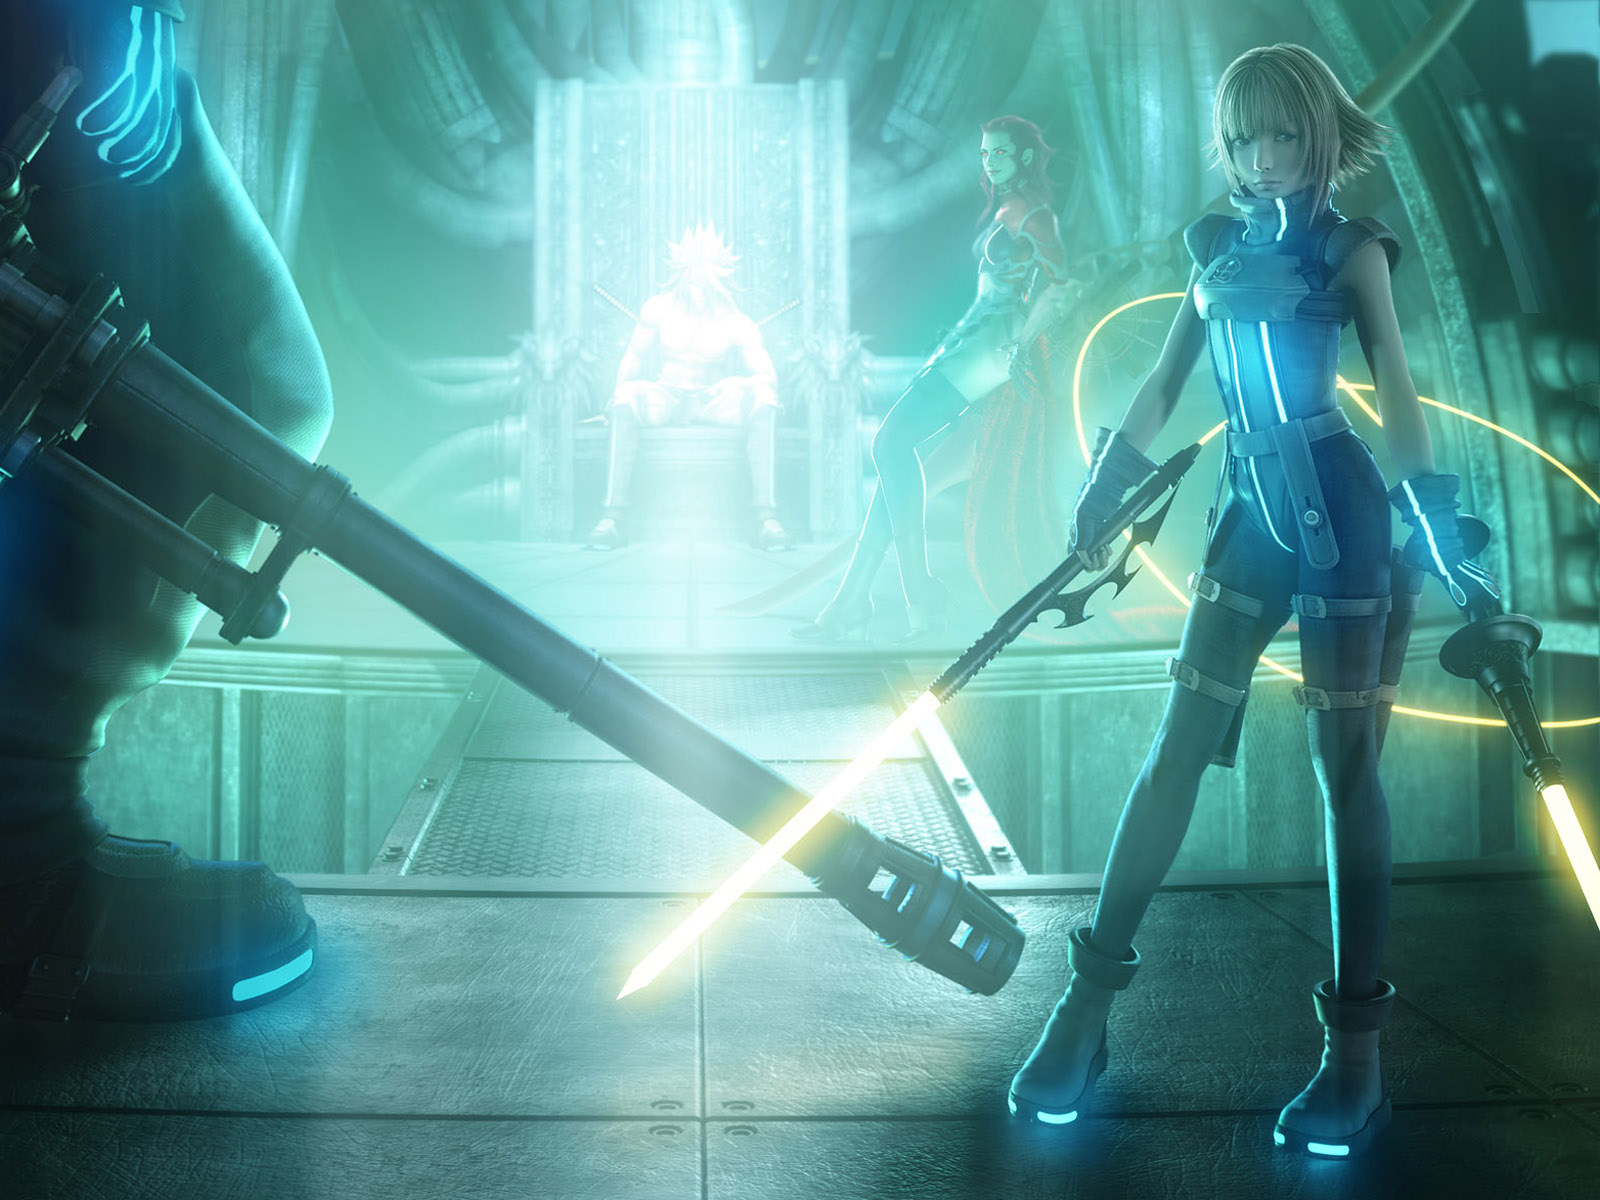 Wallpaper Ff7 Dirge Of Cerberus Investment Banking